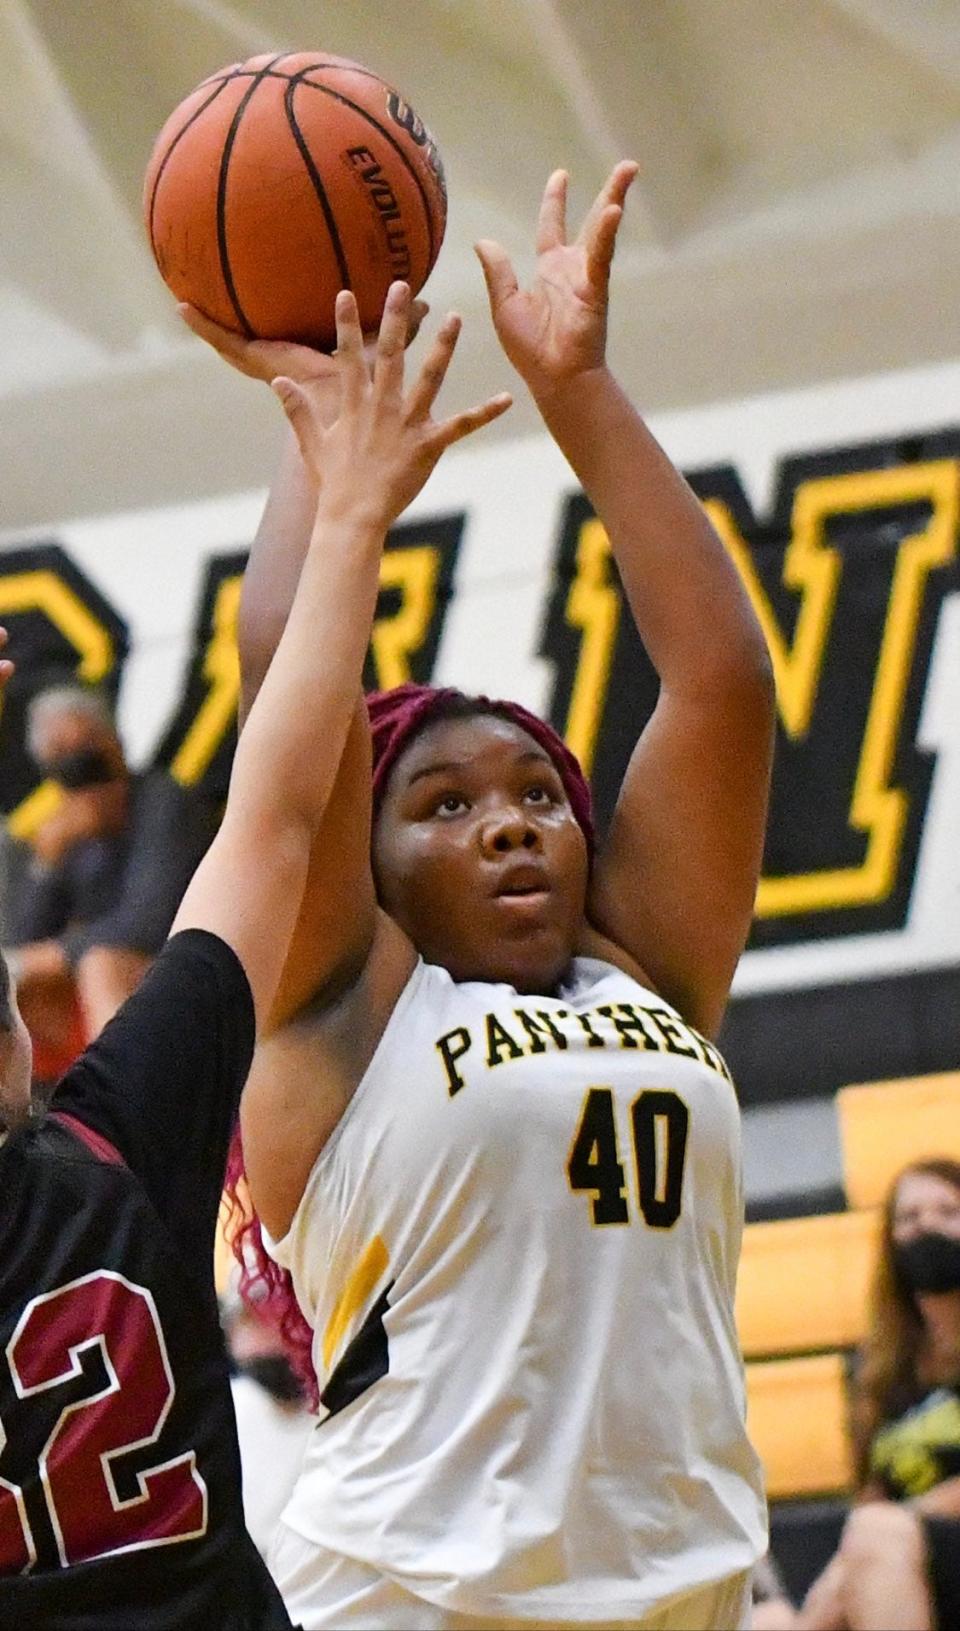 Alanna Young is averaging 21.4 points per game for Newbury Park.